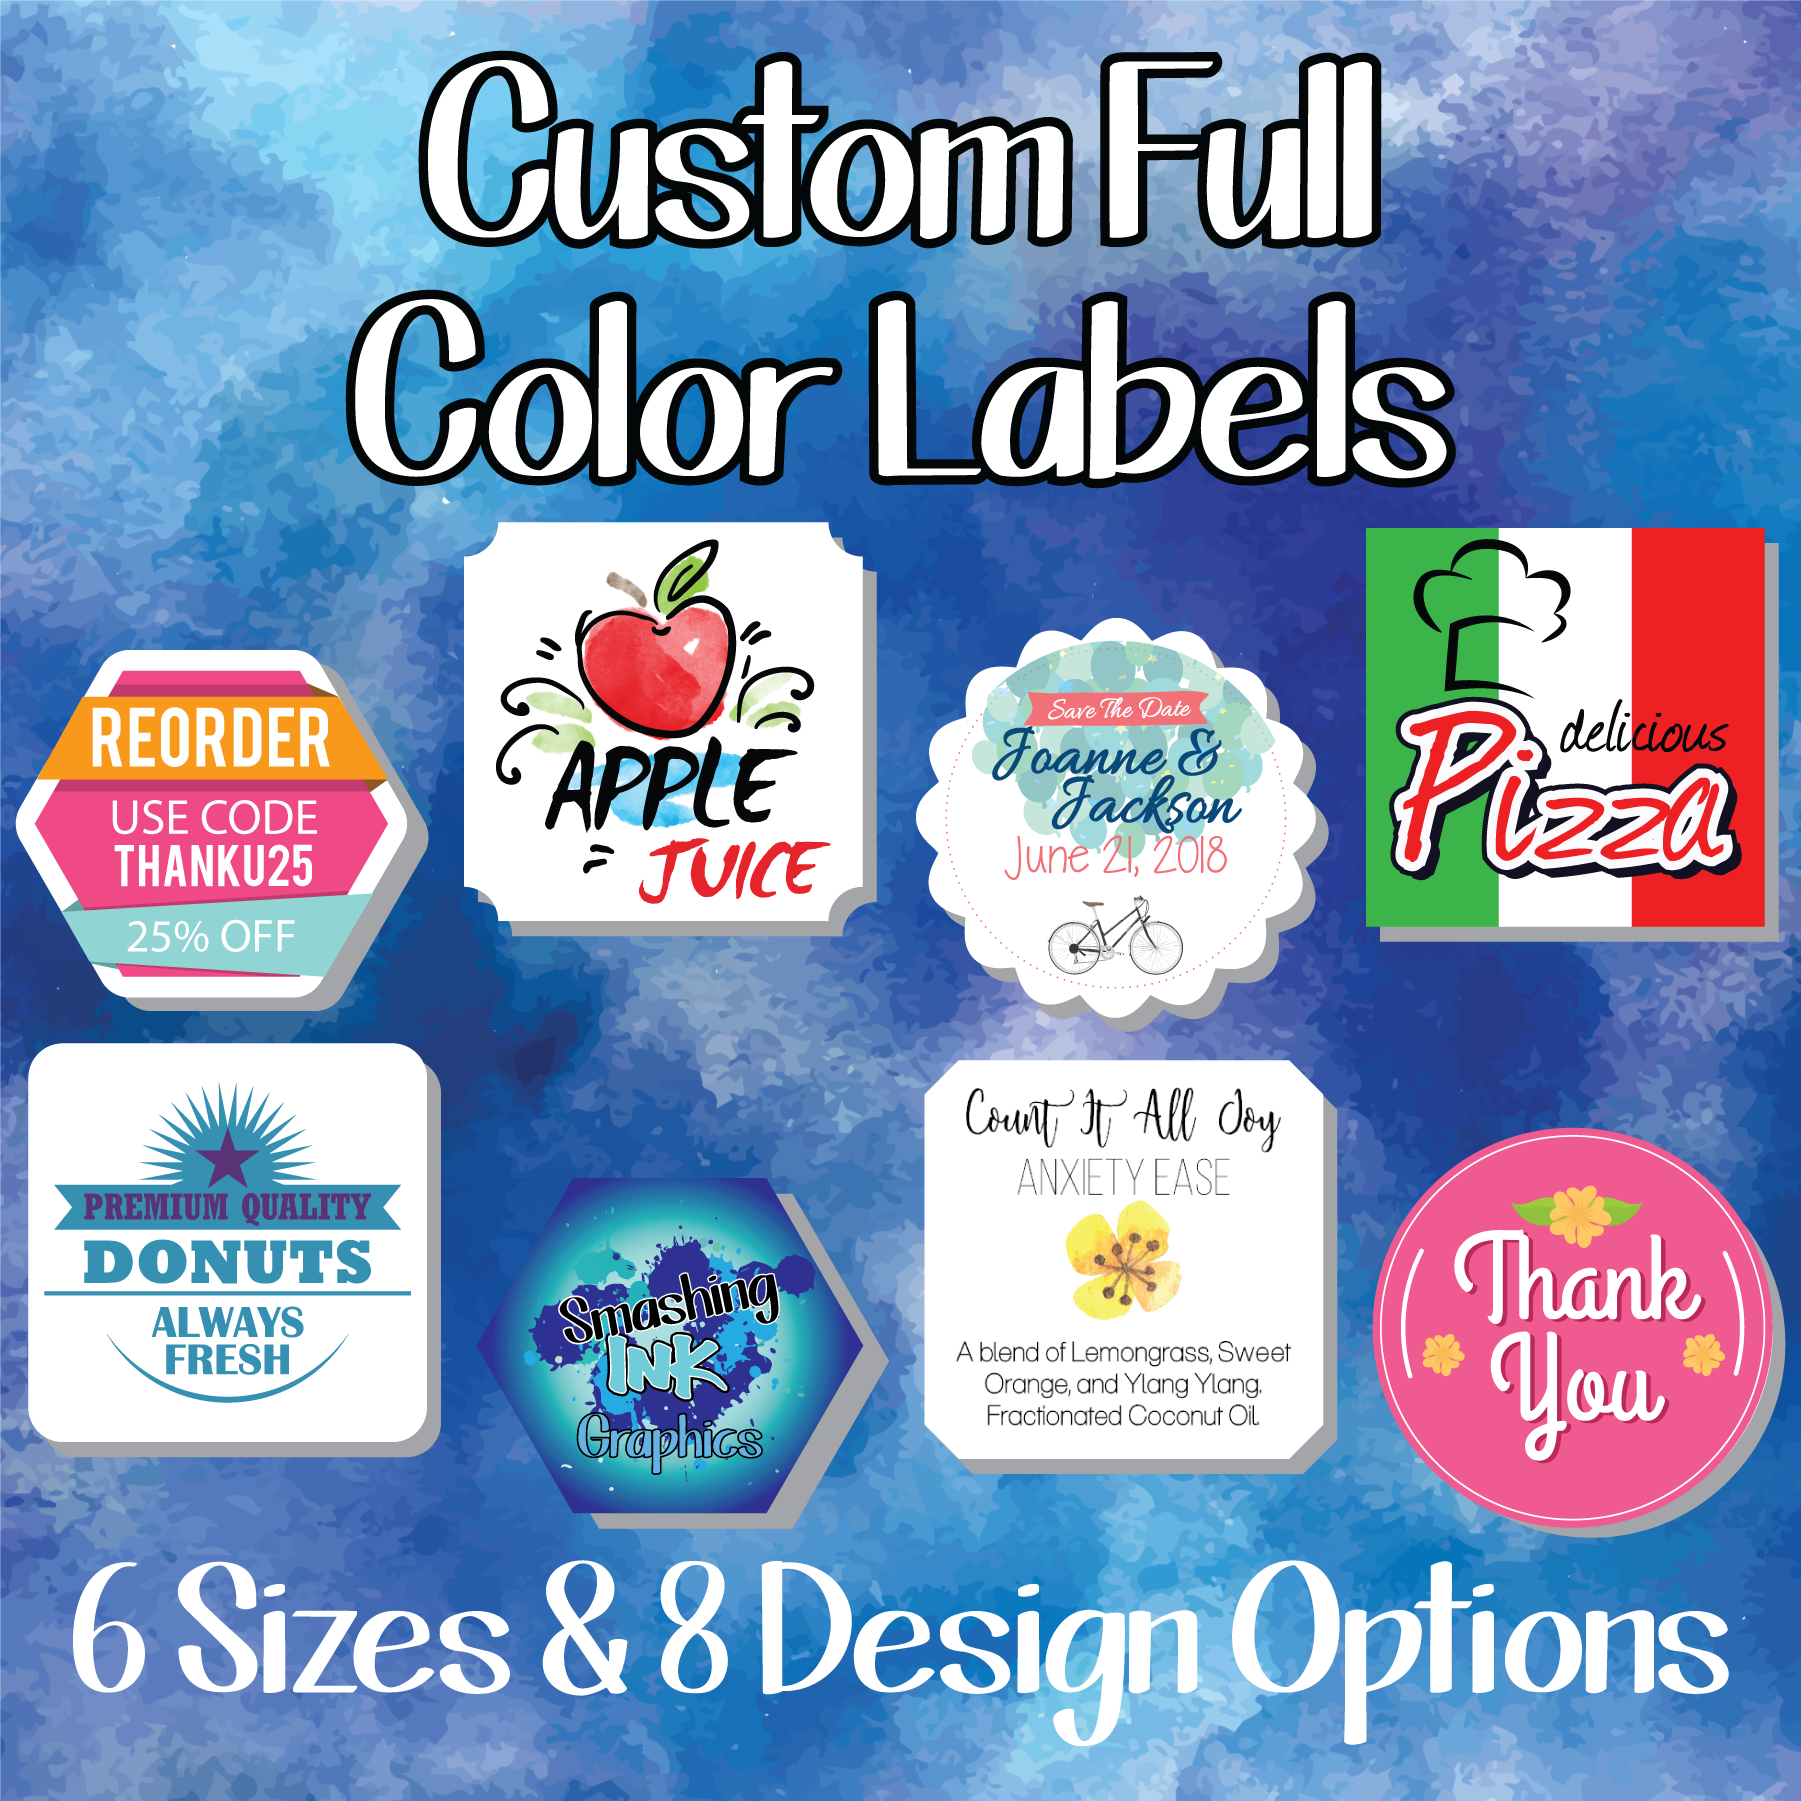 HOW TO MAKE TUMBLERS WITH PRINTABLE STICKER VINYL that LOOK like  SUBLIMATION ! 